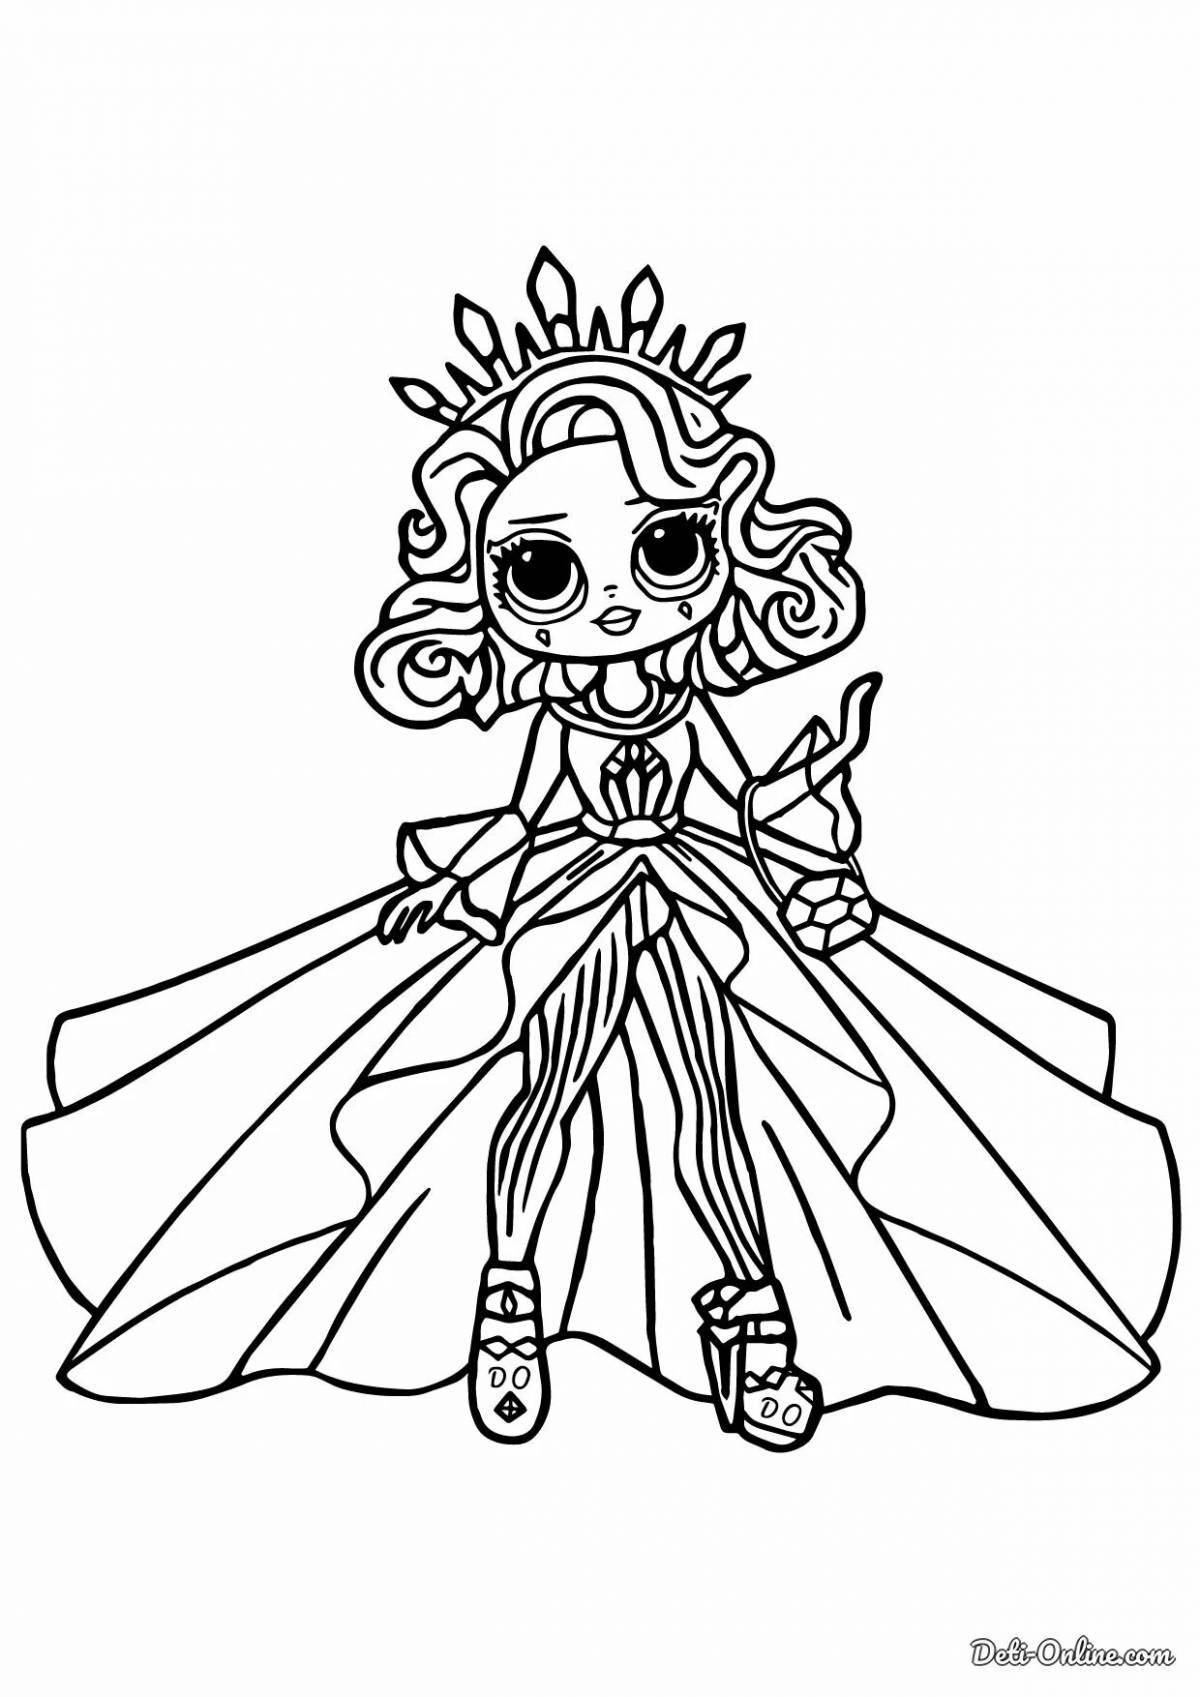 Creative doll lol teen coloring page